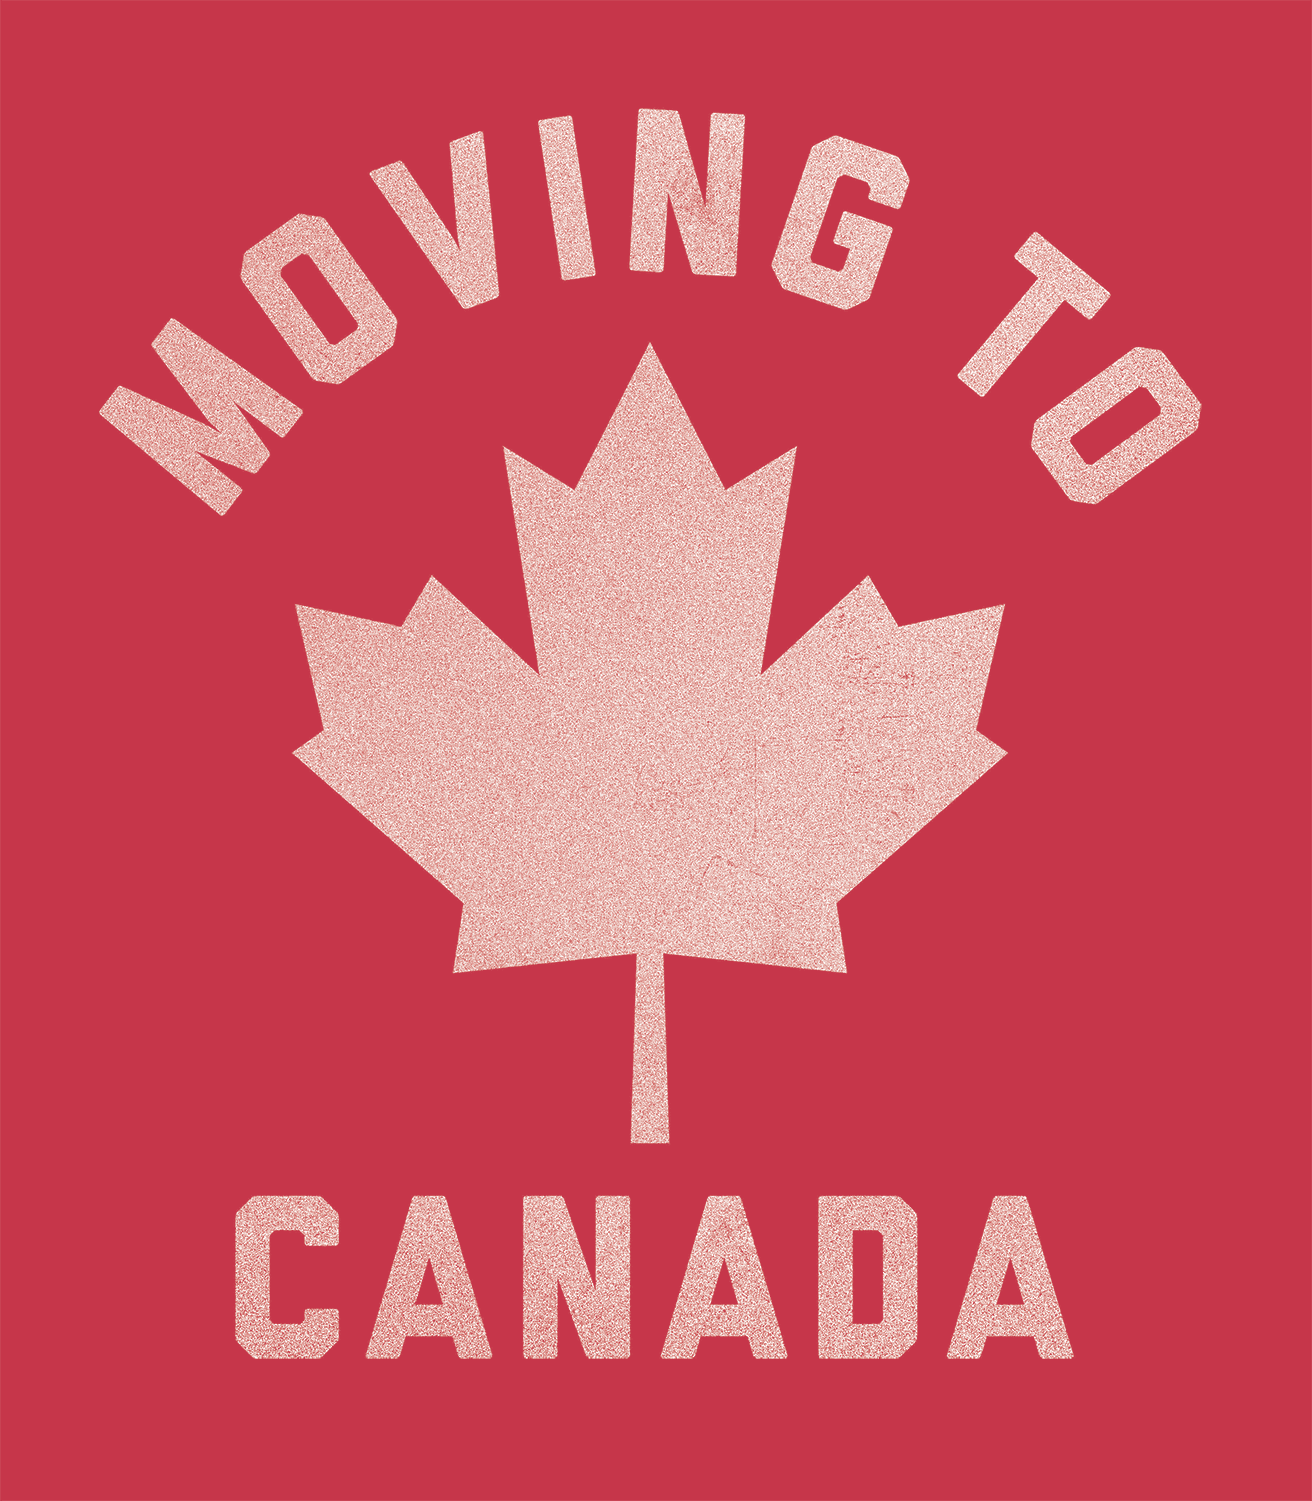 Moving to Canada | Know Your Meme